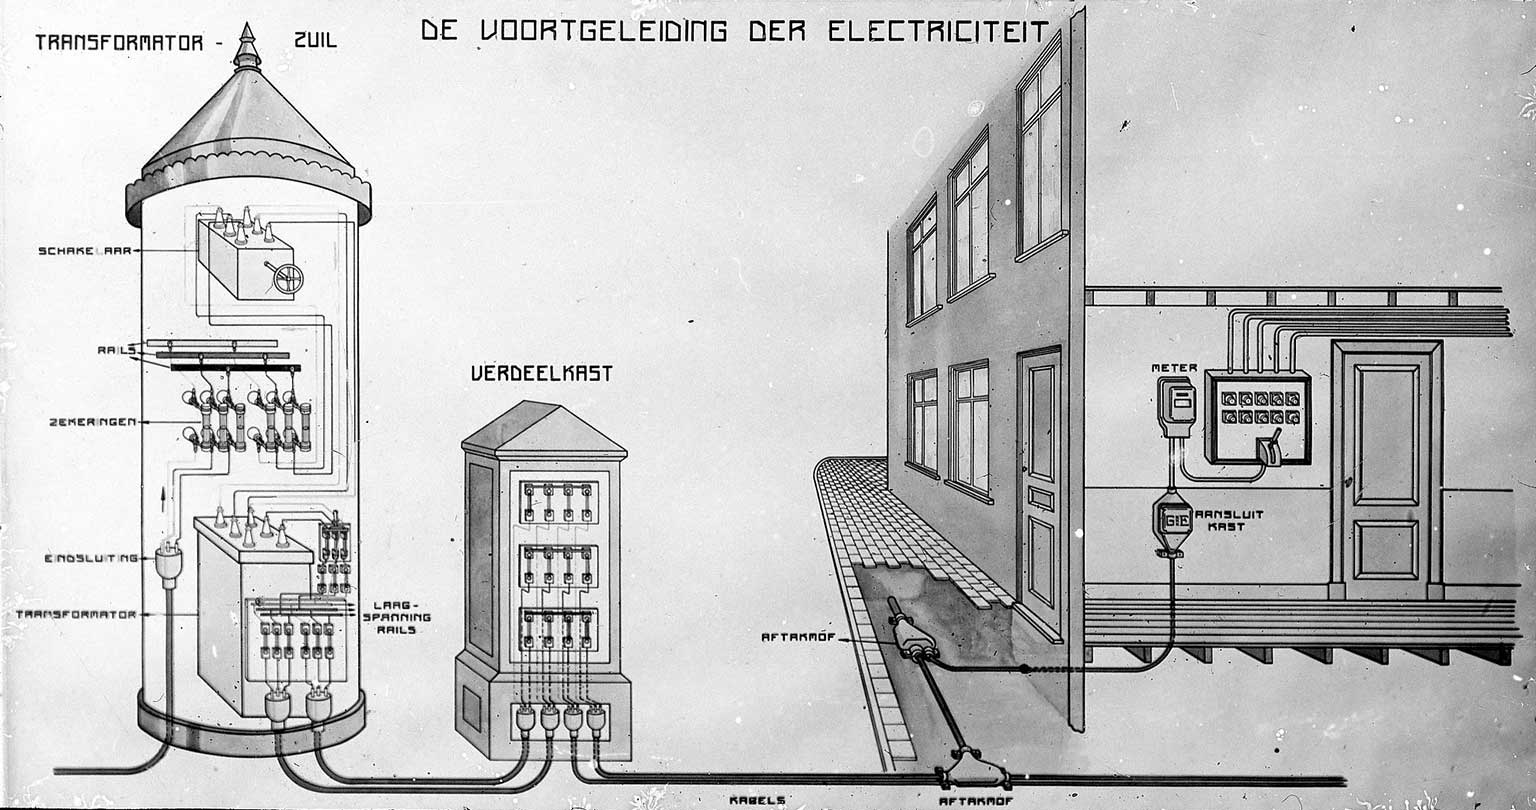 Diagram from 1915-1930, electricity from transformer column to junction box to home